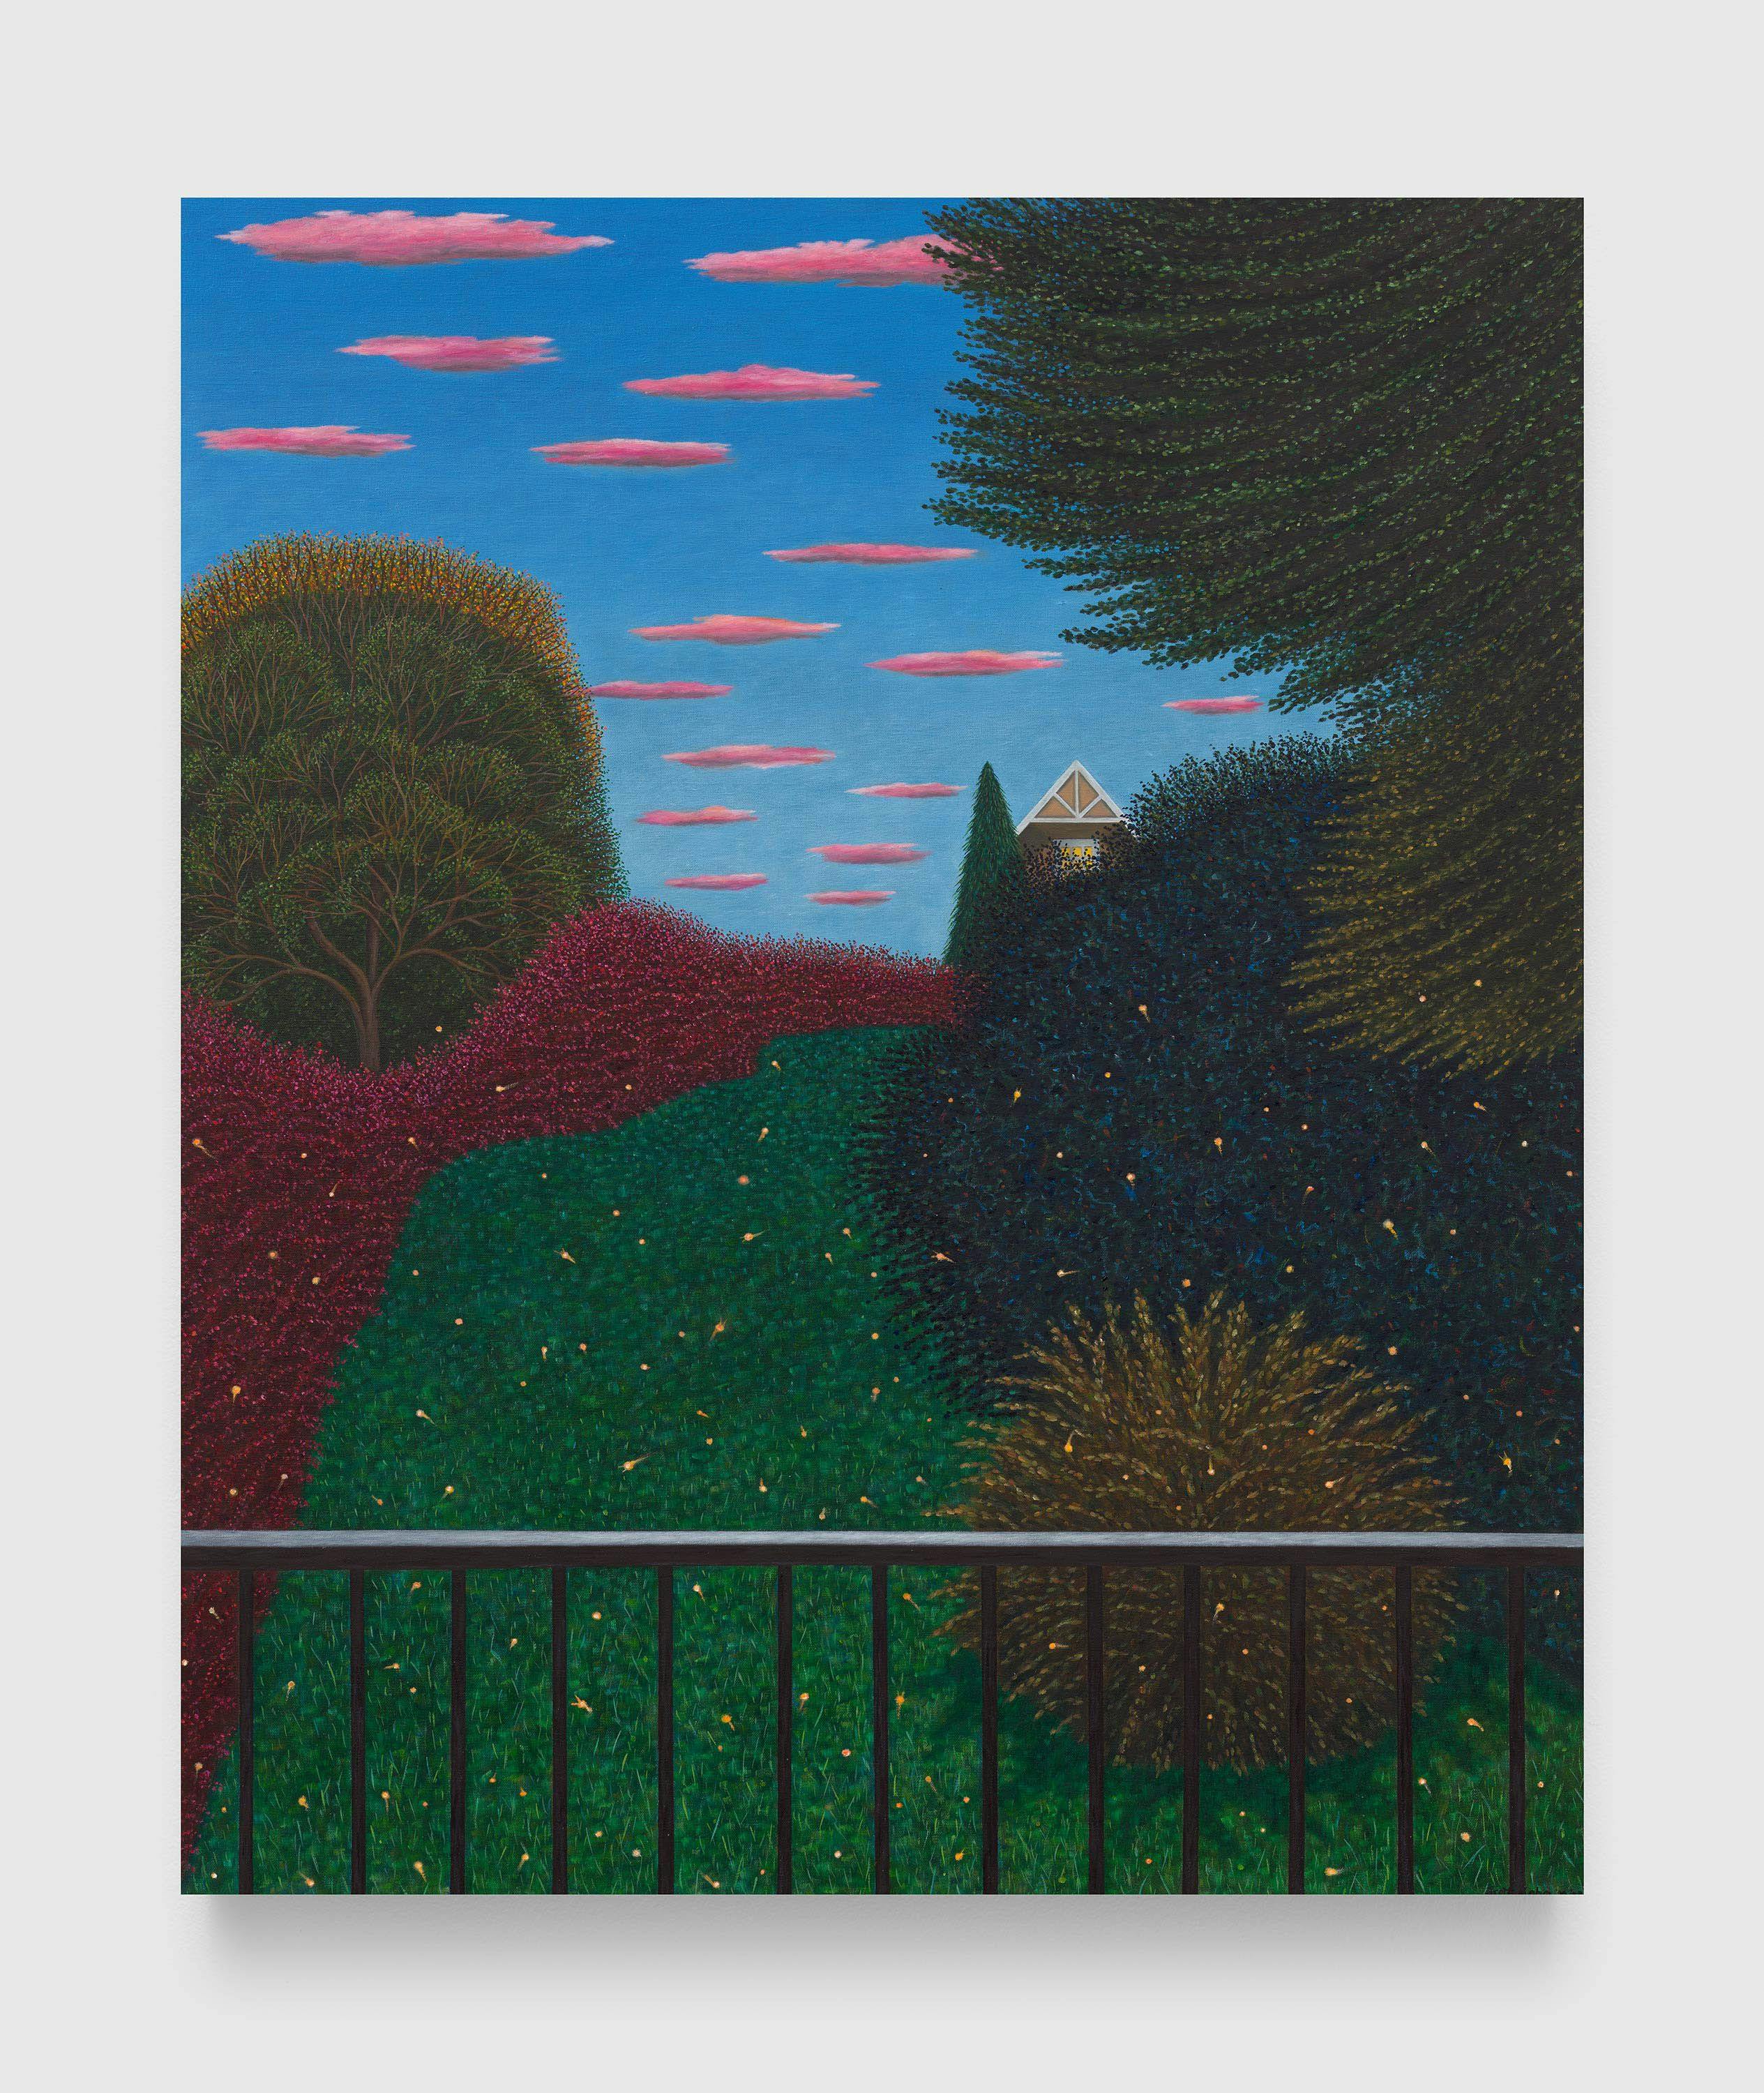 A painting by Scott Kahn, titled Fireflies, dated 2022 to 2023.